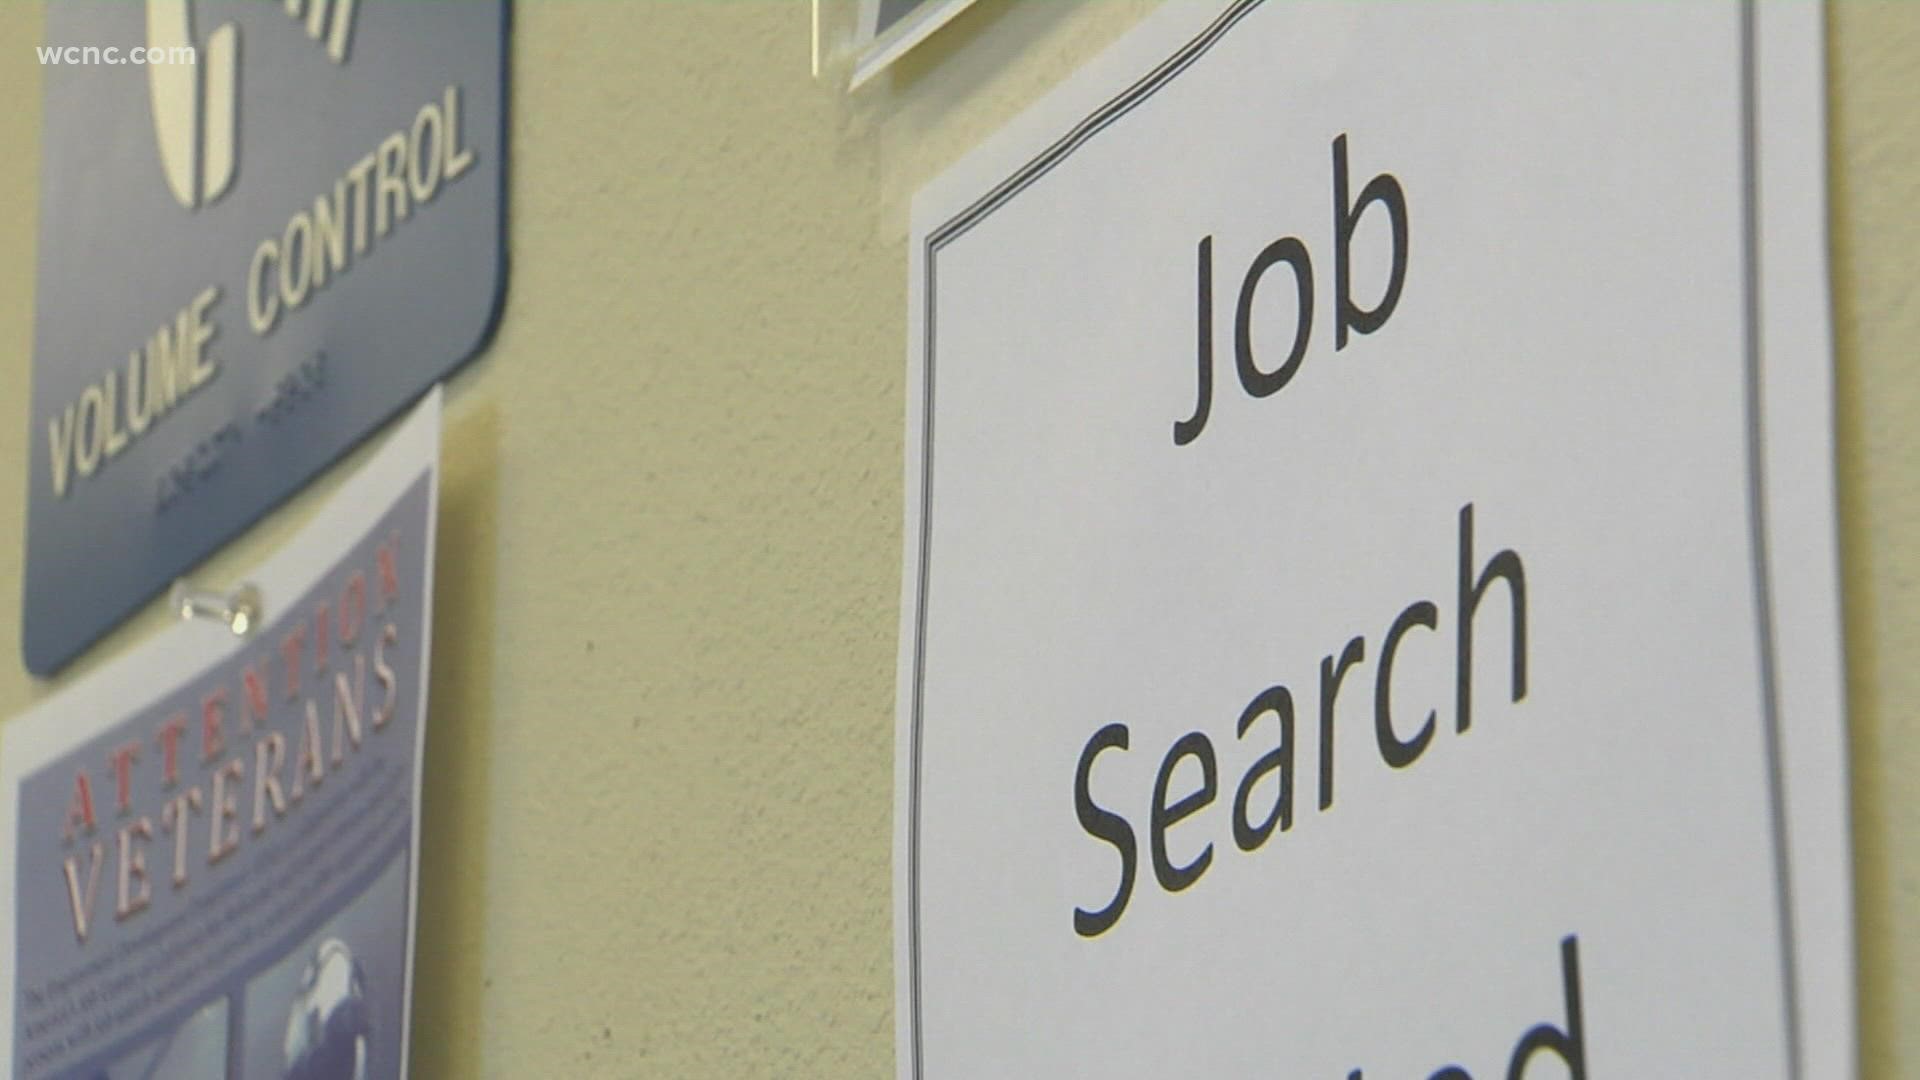 The study shows for every unemployed person, the state has 0.97 jobs.